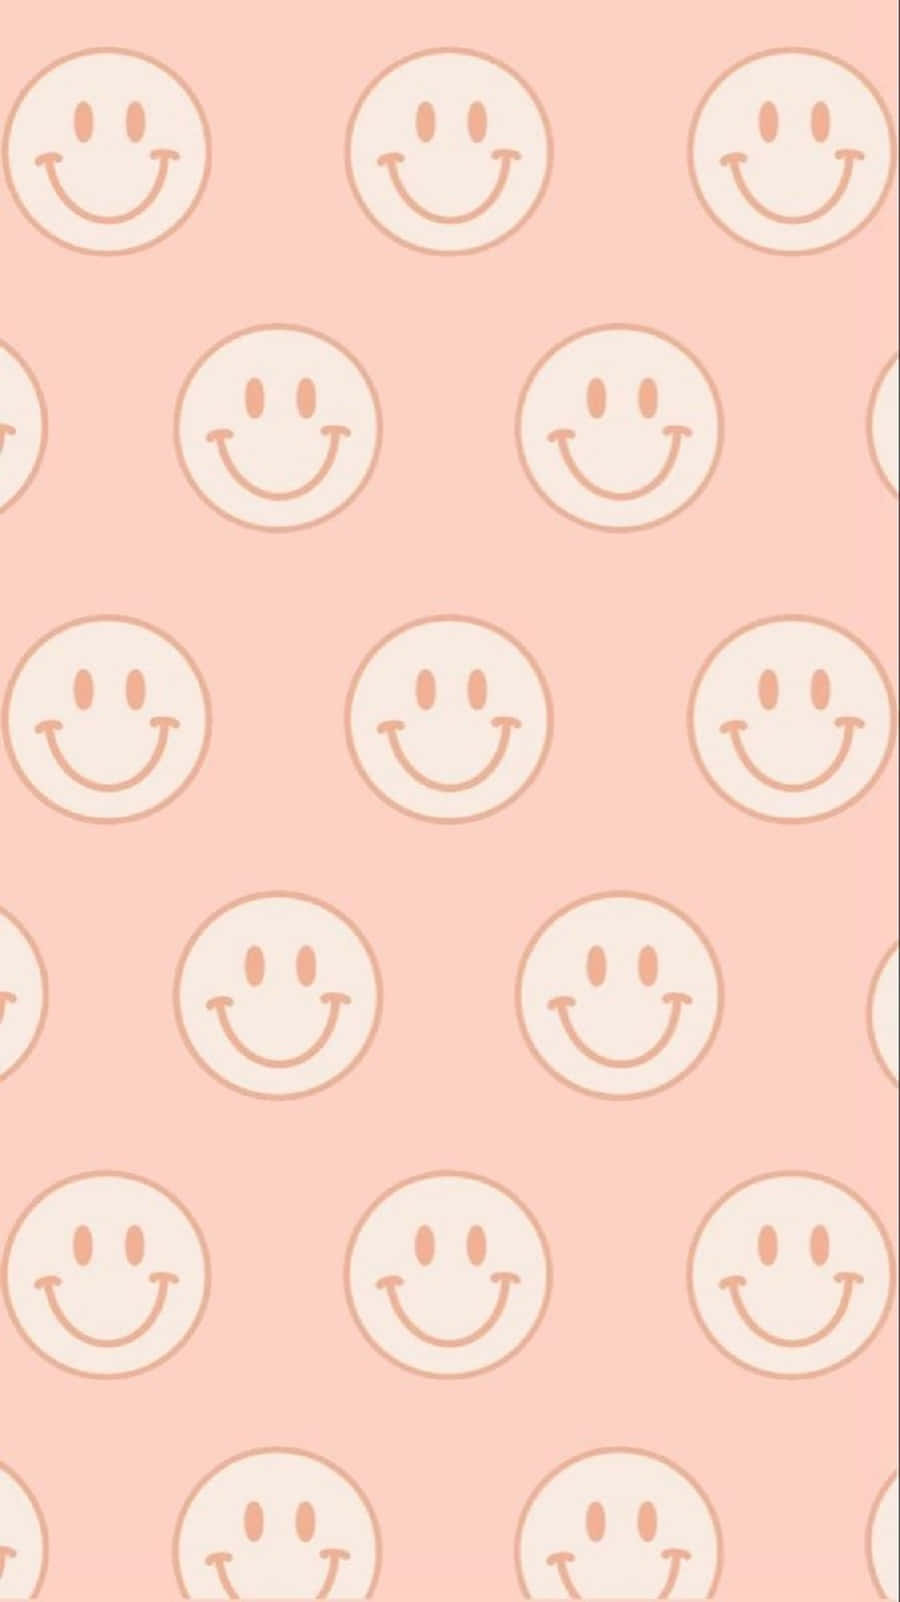 Preppy Smiley Face Background.